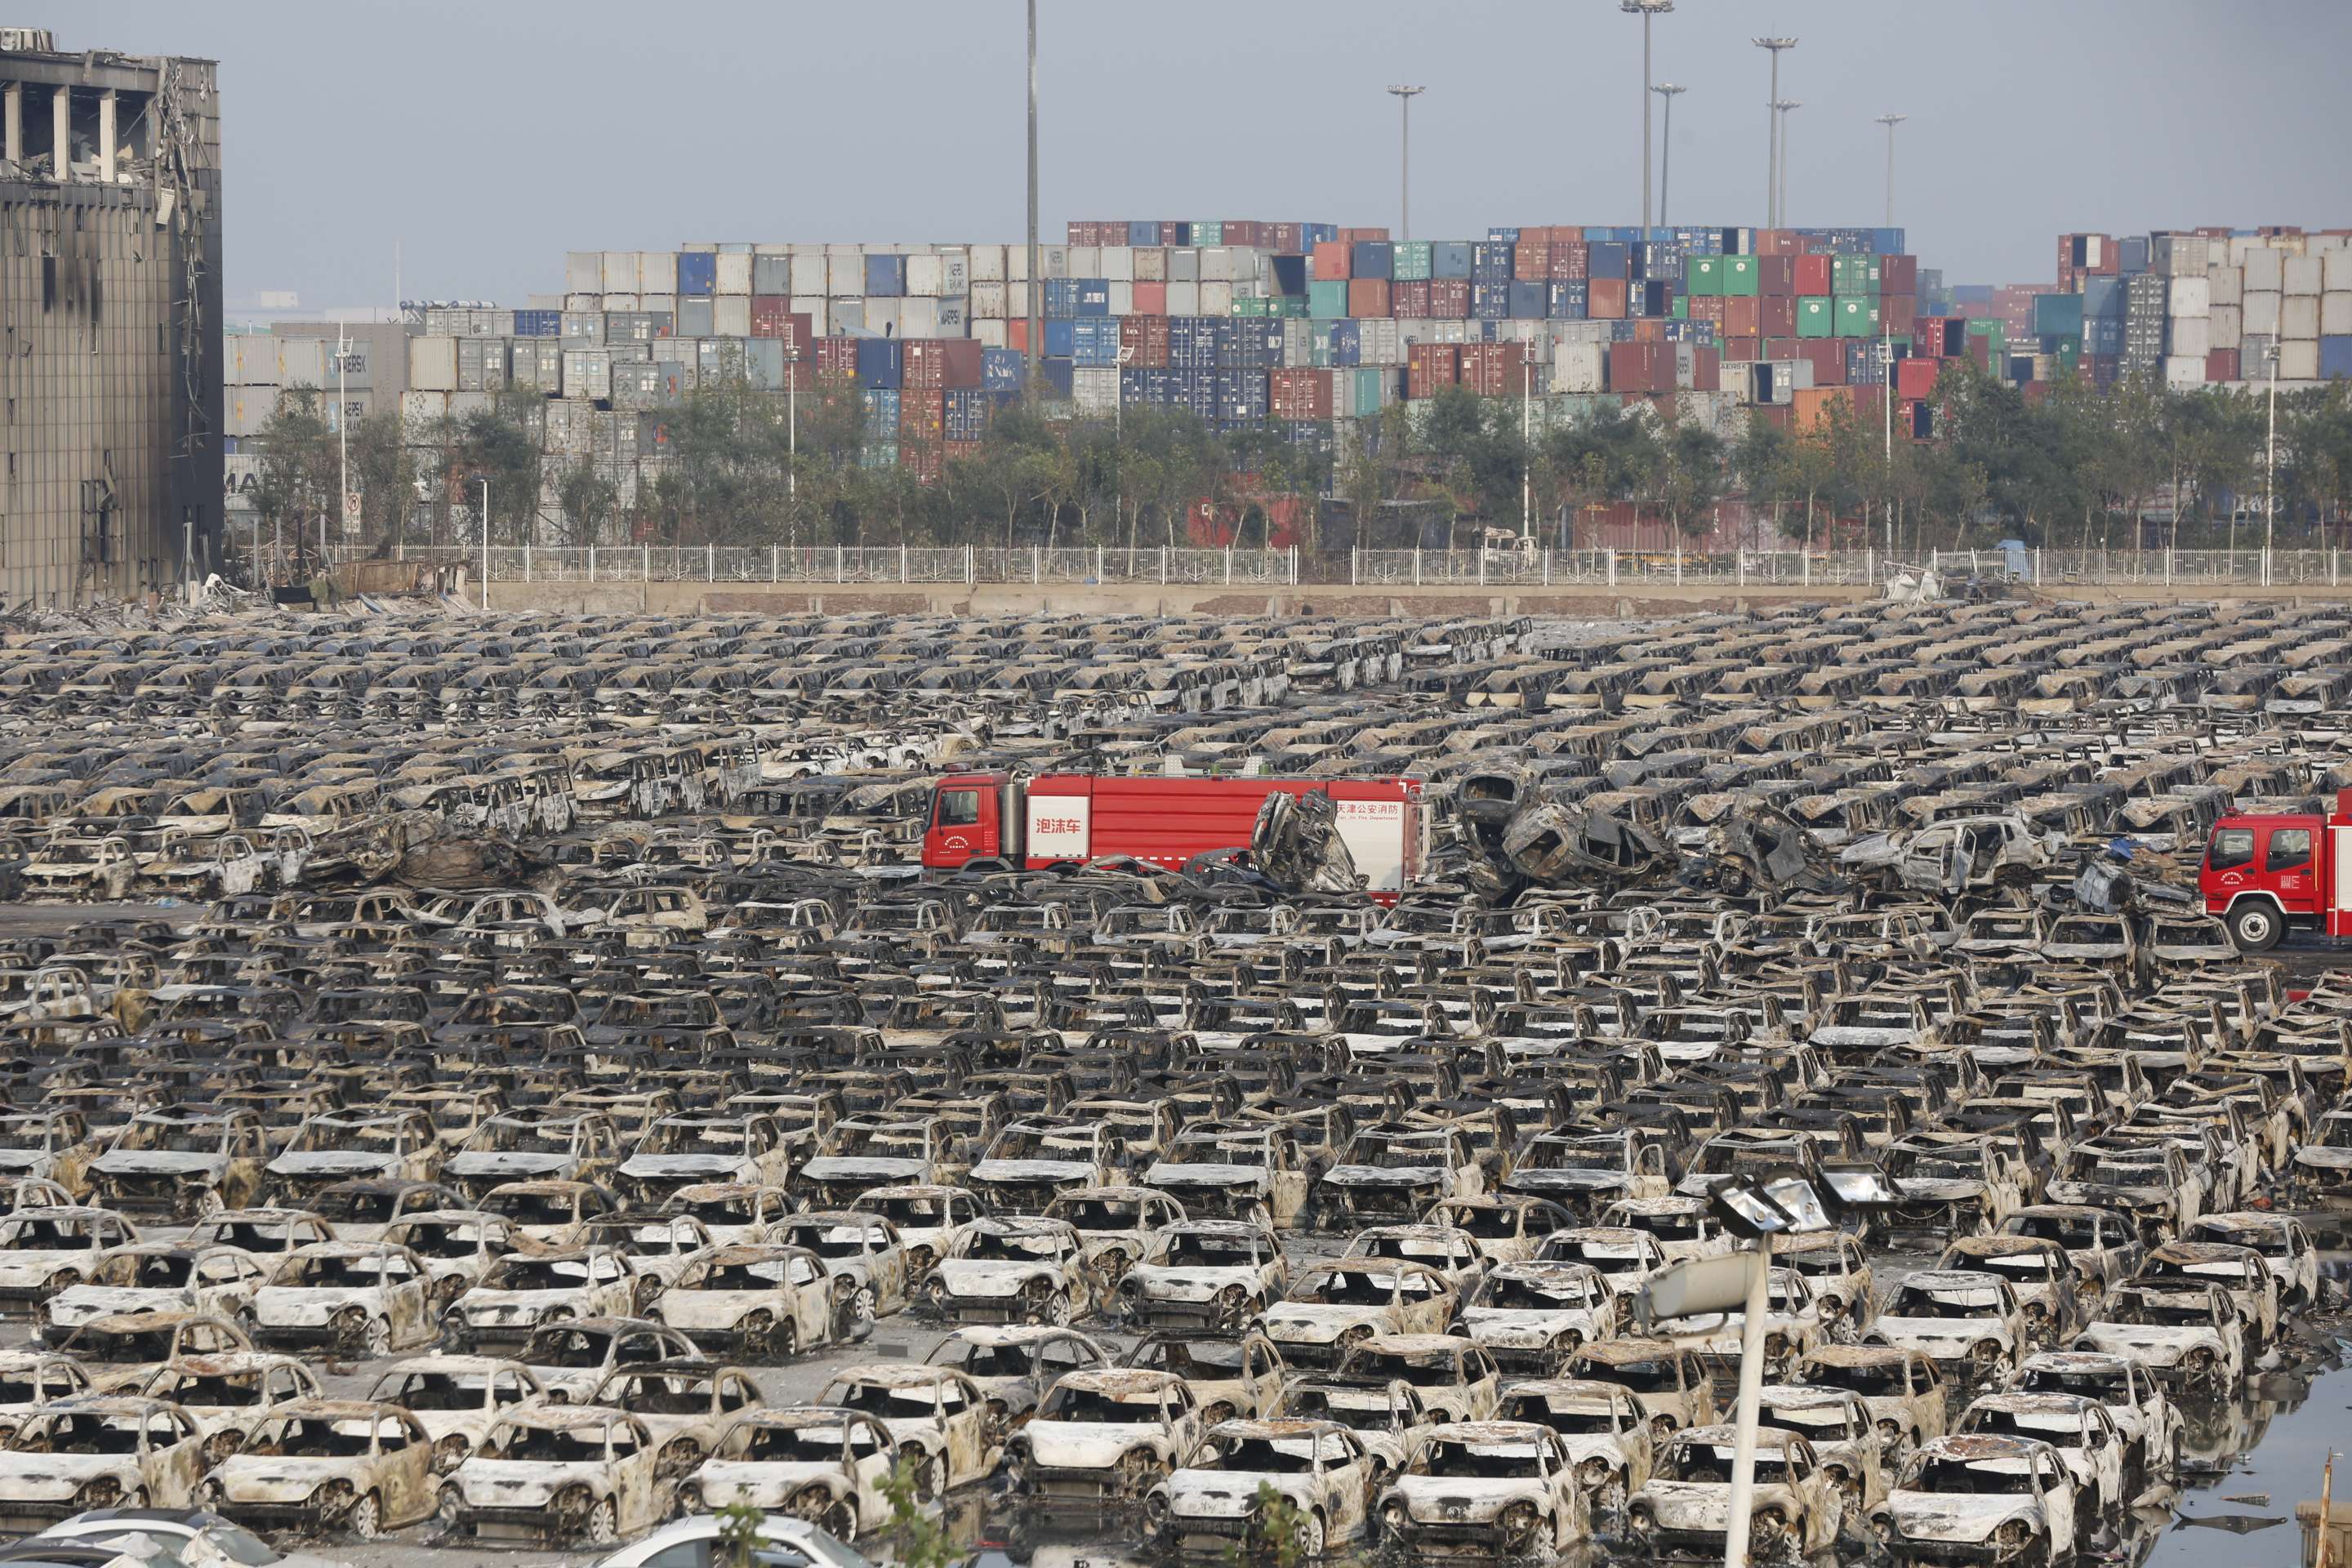 Brand new motor vehicles destroyed by the explosion in the Binhai New District of Tianjin in August 2015. Photo: China Foto Press